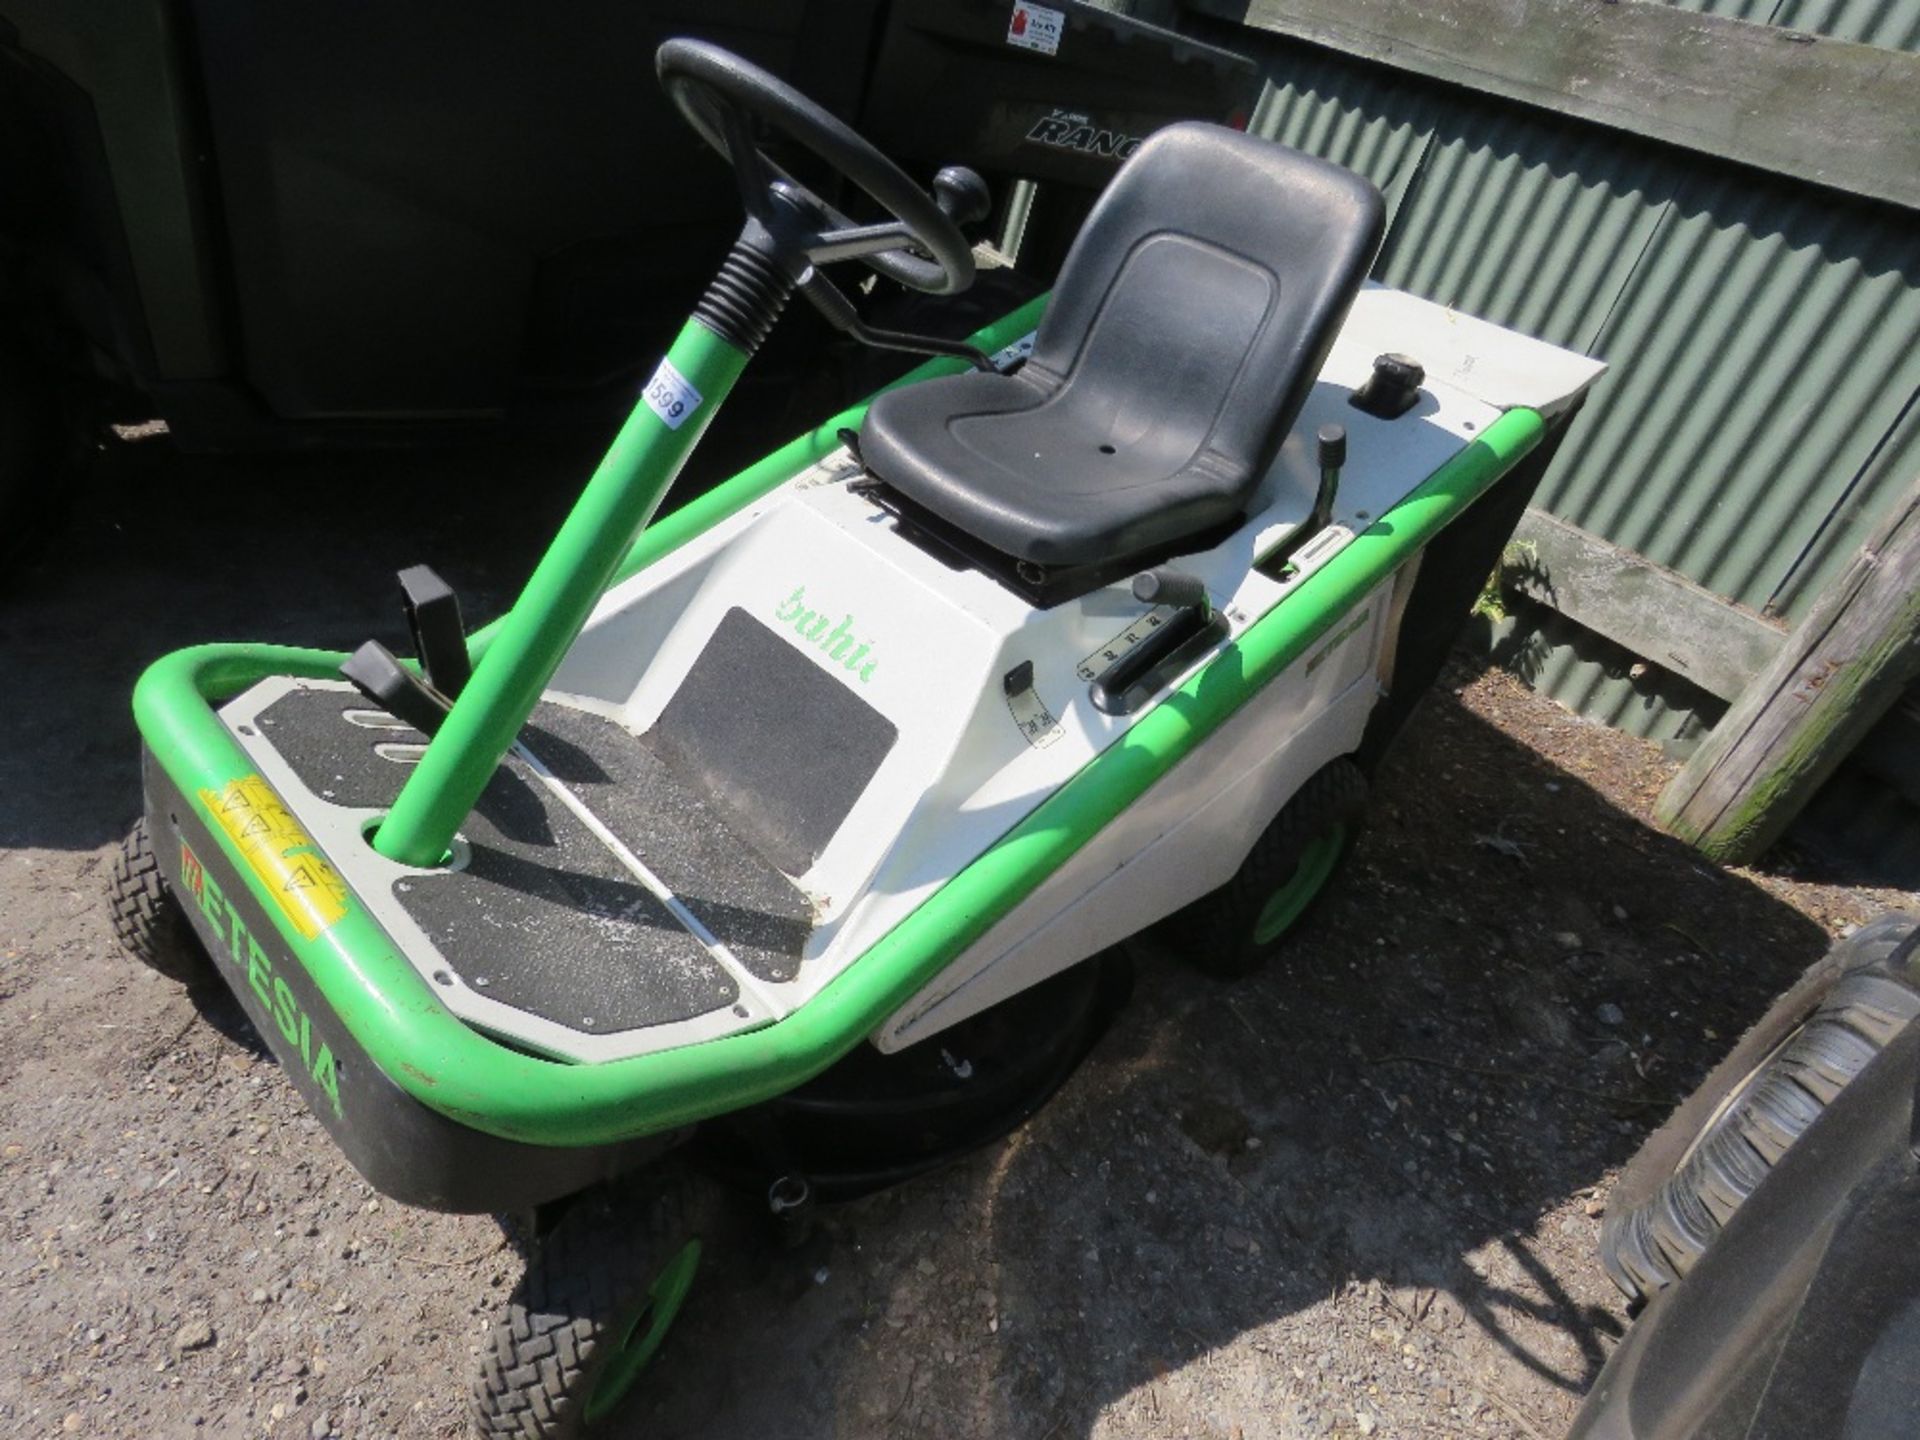 ETESIA PROFESSIONAL HYDRO RIDE ON MOWER WITH REAR COLLECTOR. WHEN TESTED WAS SEEN TO RUN AND DRIVE A - Image 2 of 9